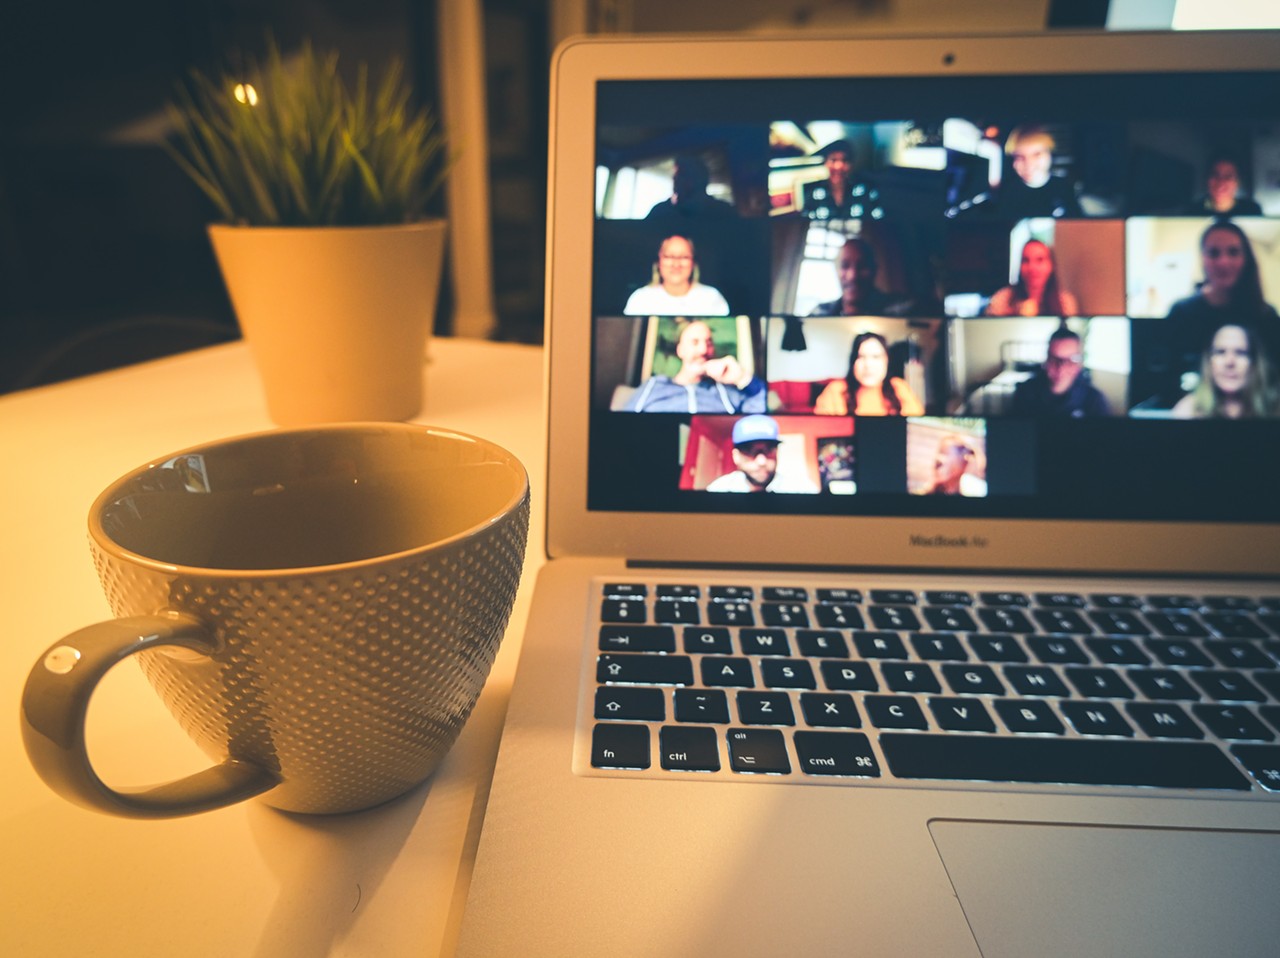 Host a Zoom party
Missing out on social interaction? Send out a Zoom link to your friends and shoot the shit on video chat using 2020's favorite app.
Photo via Unsplash / Compare Fibre